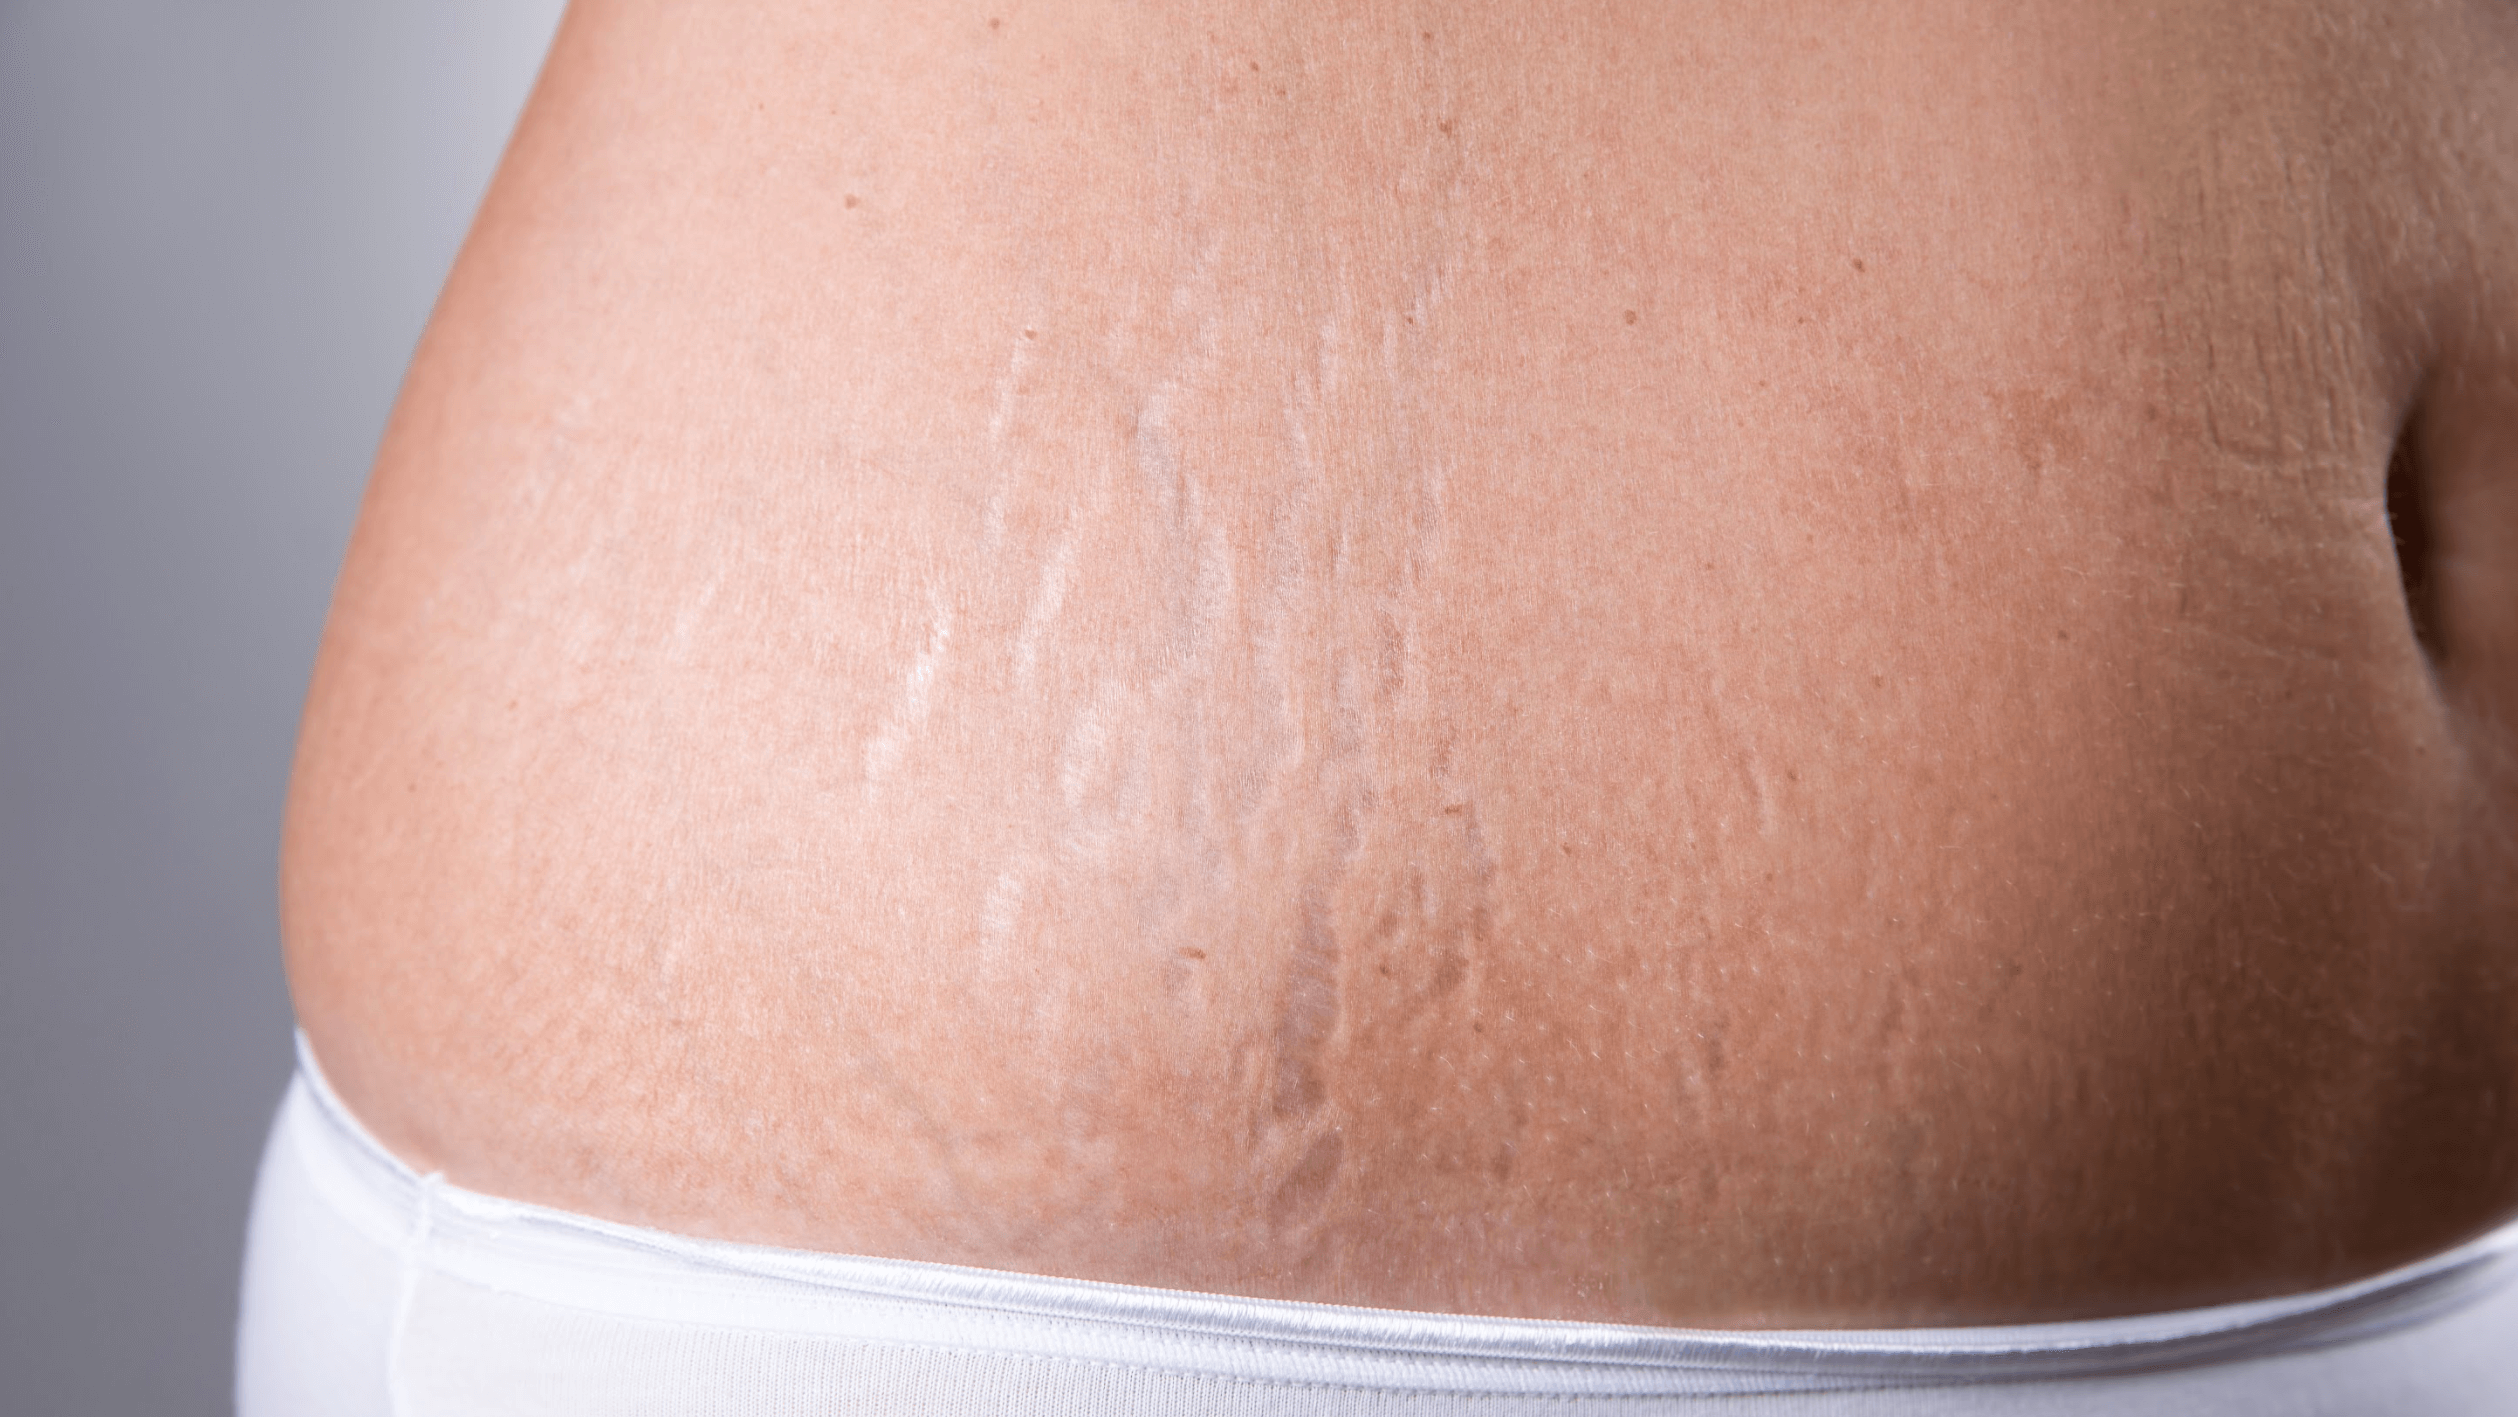 How Does Microneedling Minimize Stretch Marks?